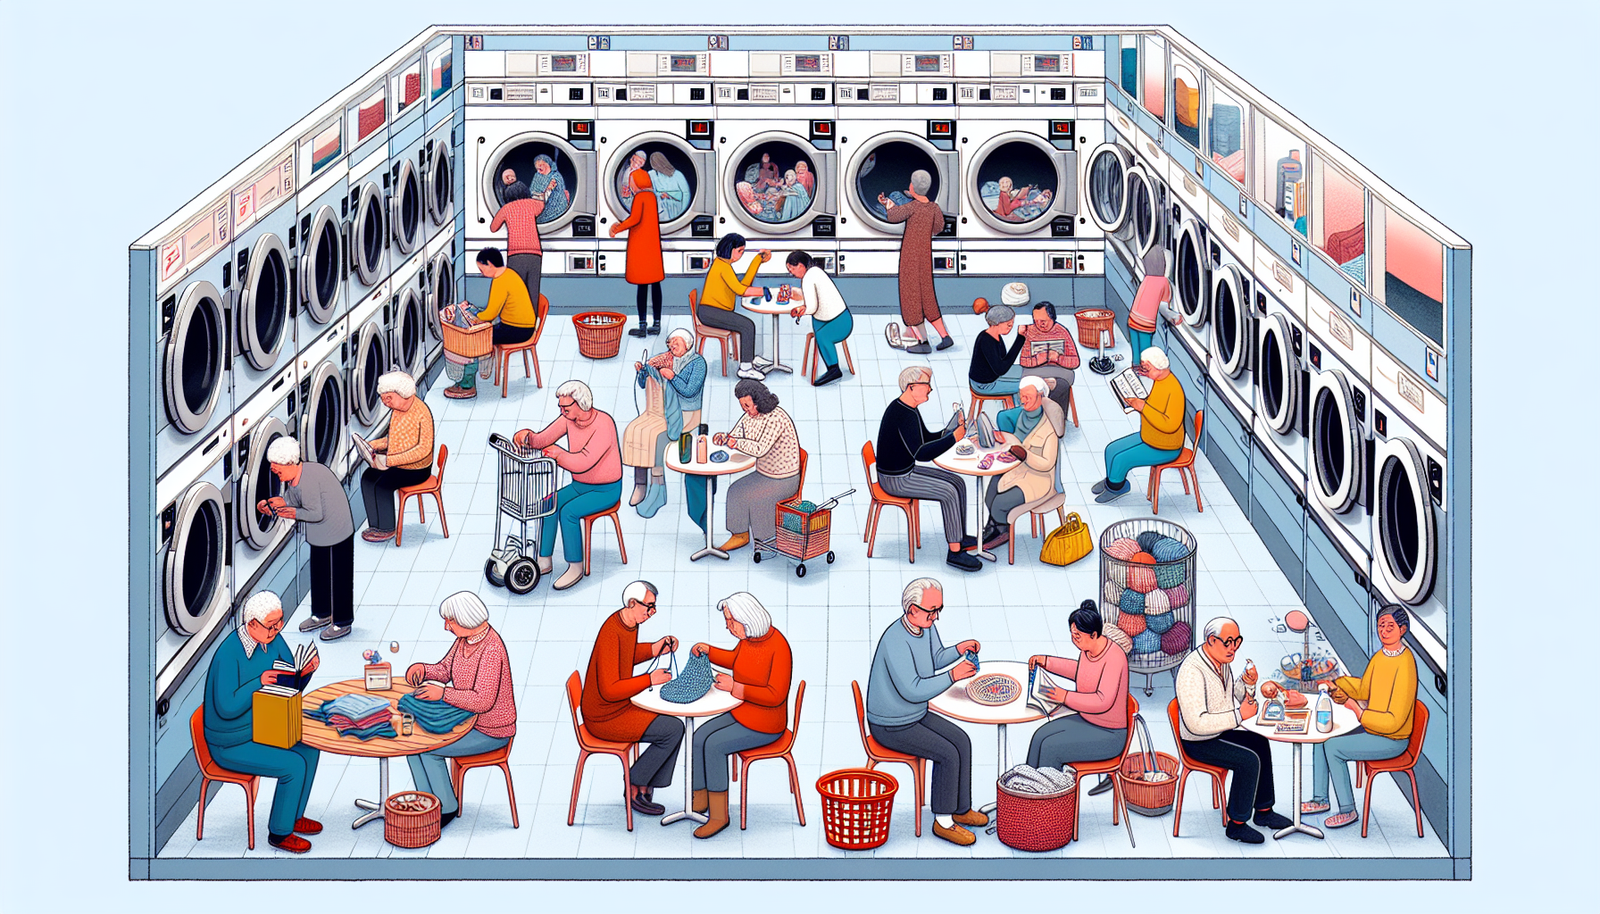 Illustration of community engagement in a laundromat